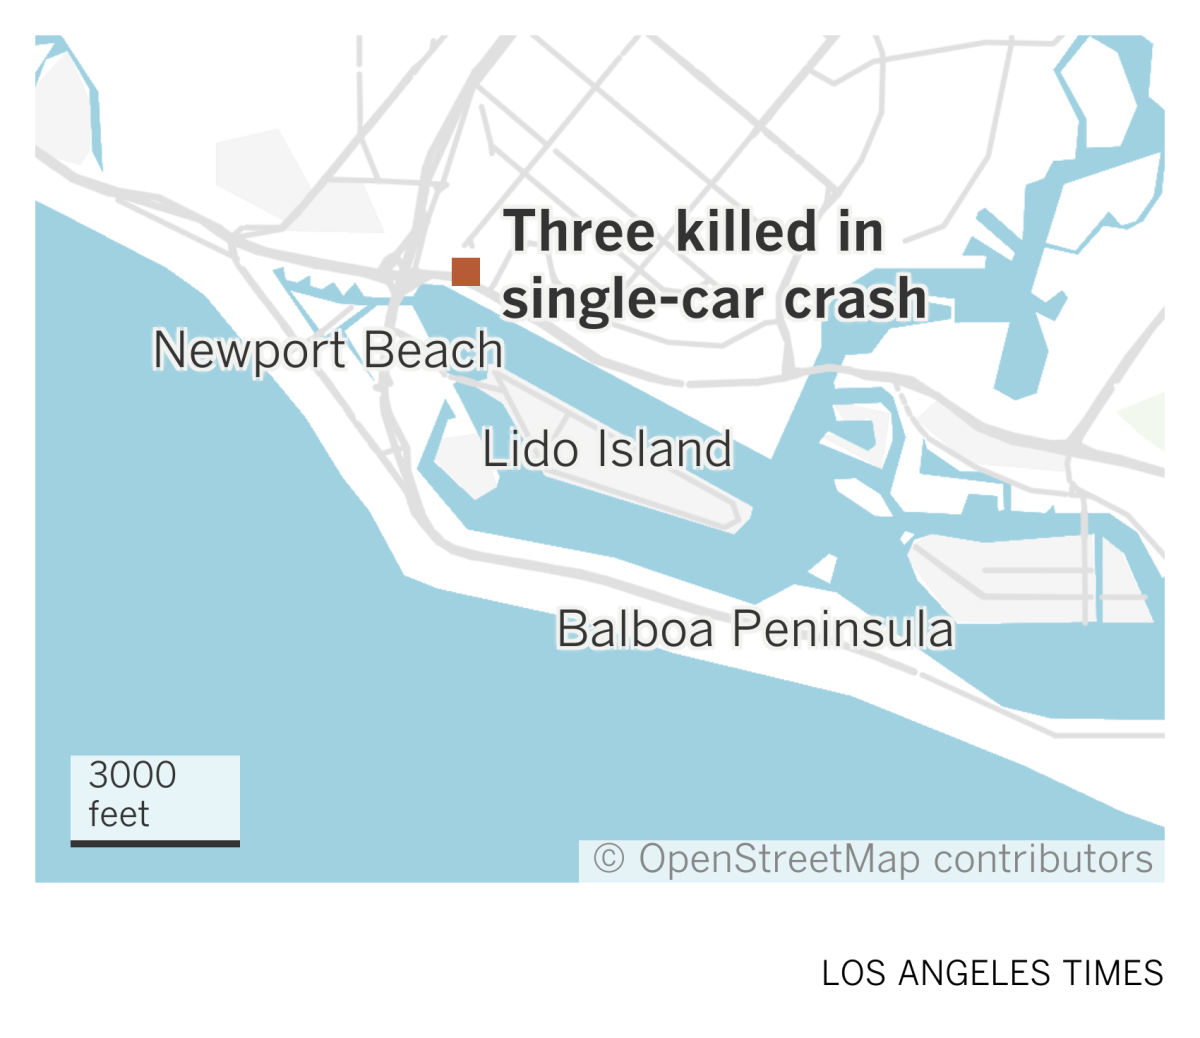 A map of Newport Beach shows the location of a single-car crash that killed three people on Pacific Coast Highway